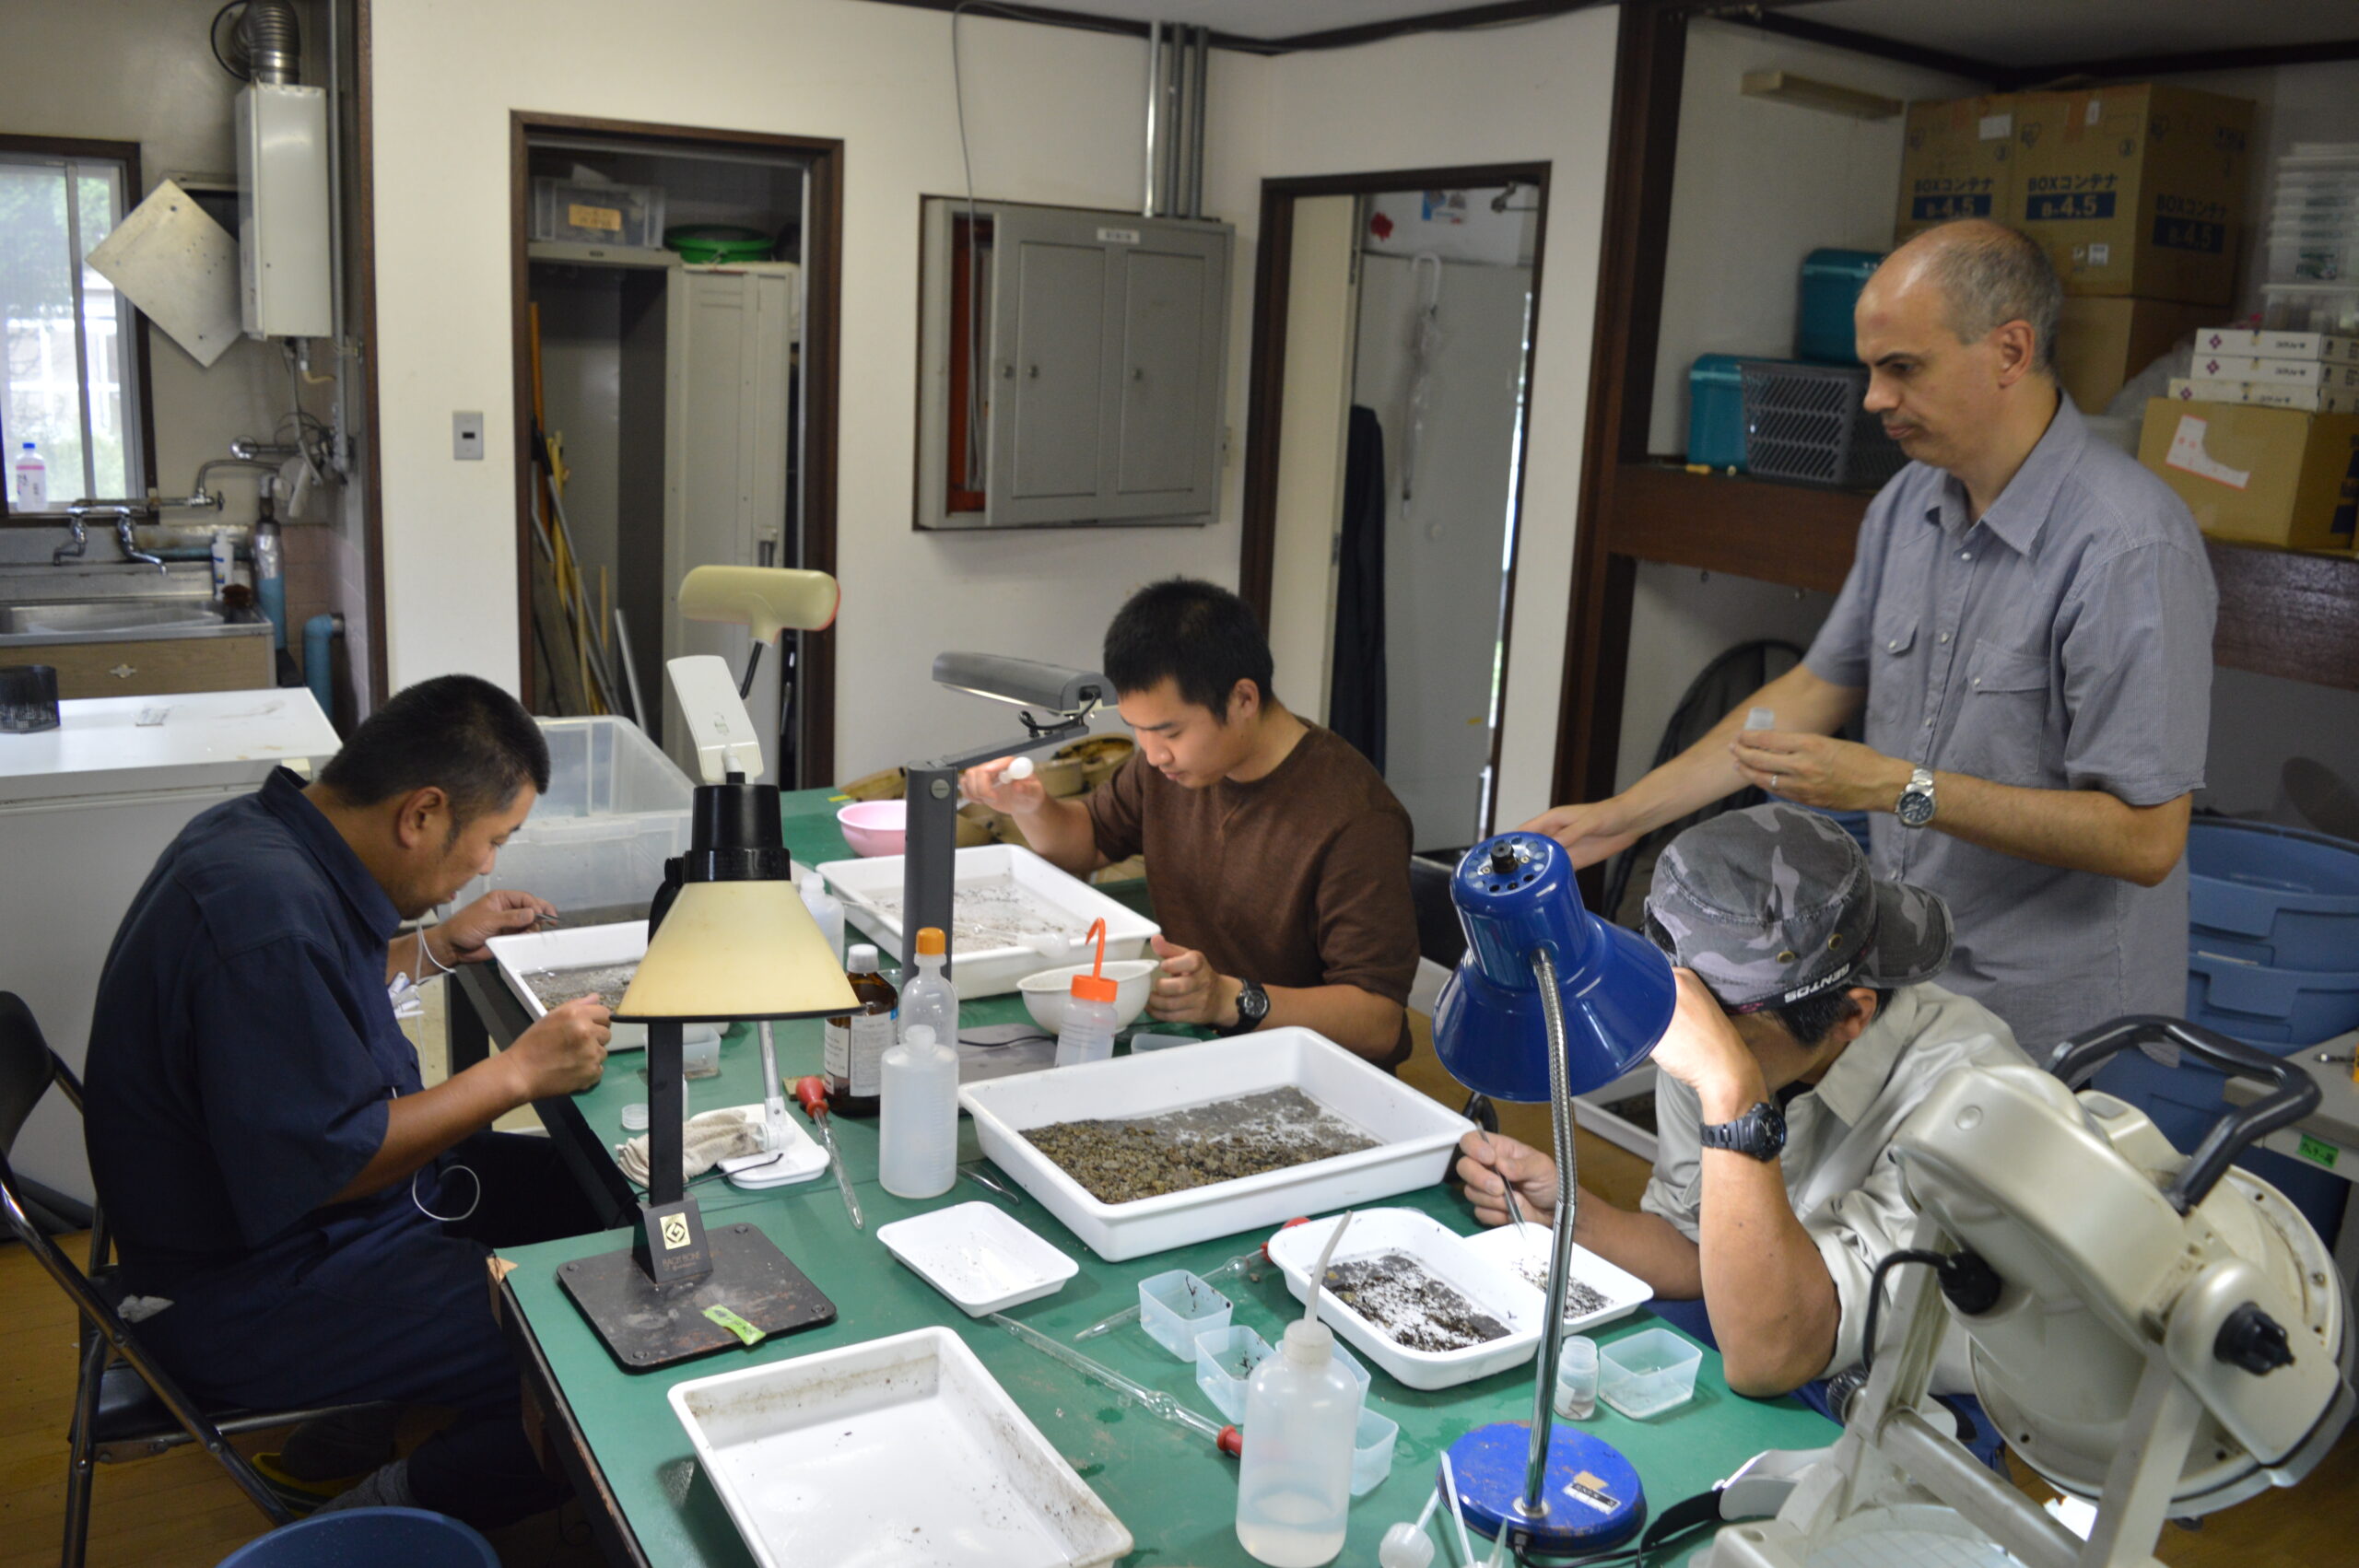 Sorting aquatic benthic invertebrates from samples in the lab for identification (Photo by Samuel Ross)